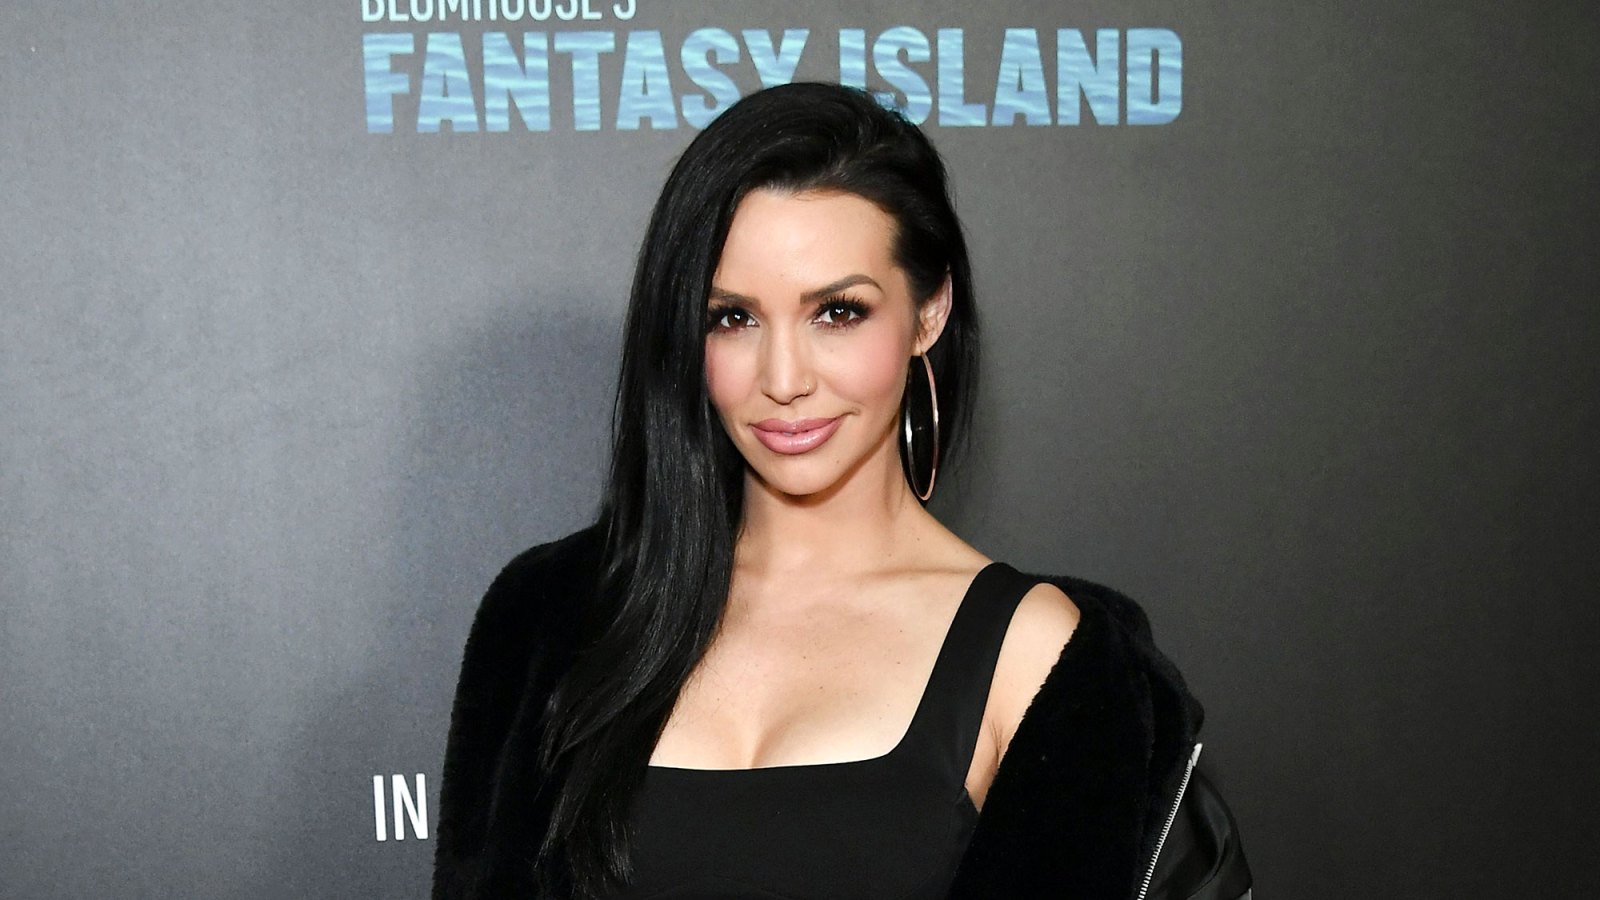 Scheana Shay Shuts Down Plastic Surgery Rumors Once and For All: ‘I Have No Botox Scheana Shay Shuts Down Plastic Surgery Rumors Once and For All: ‘I Have No Botox